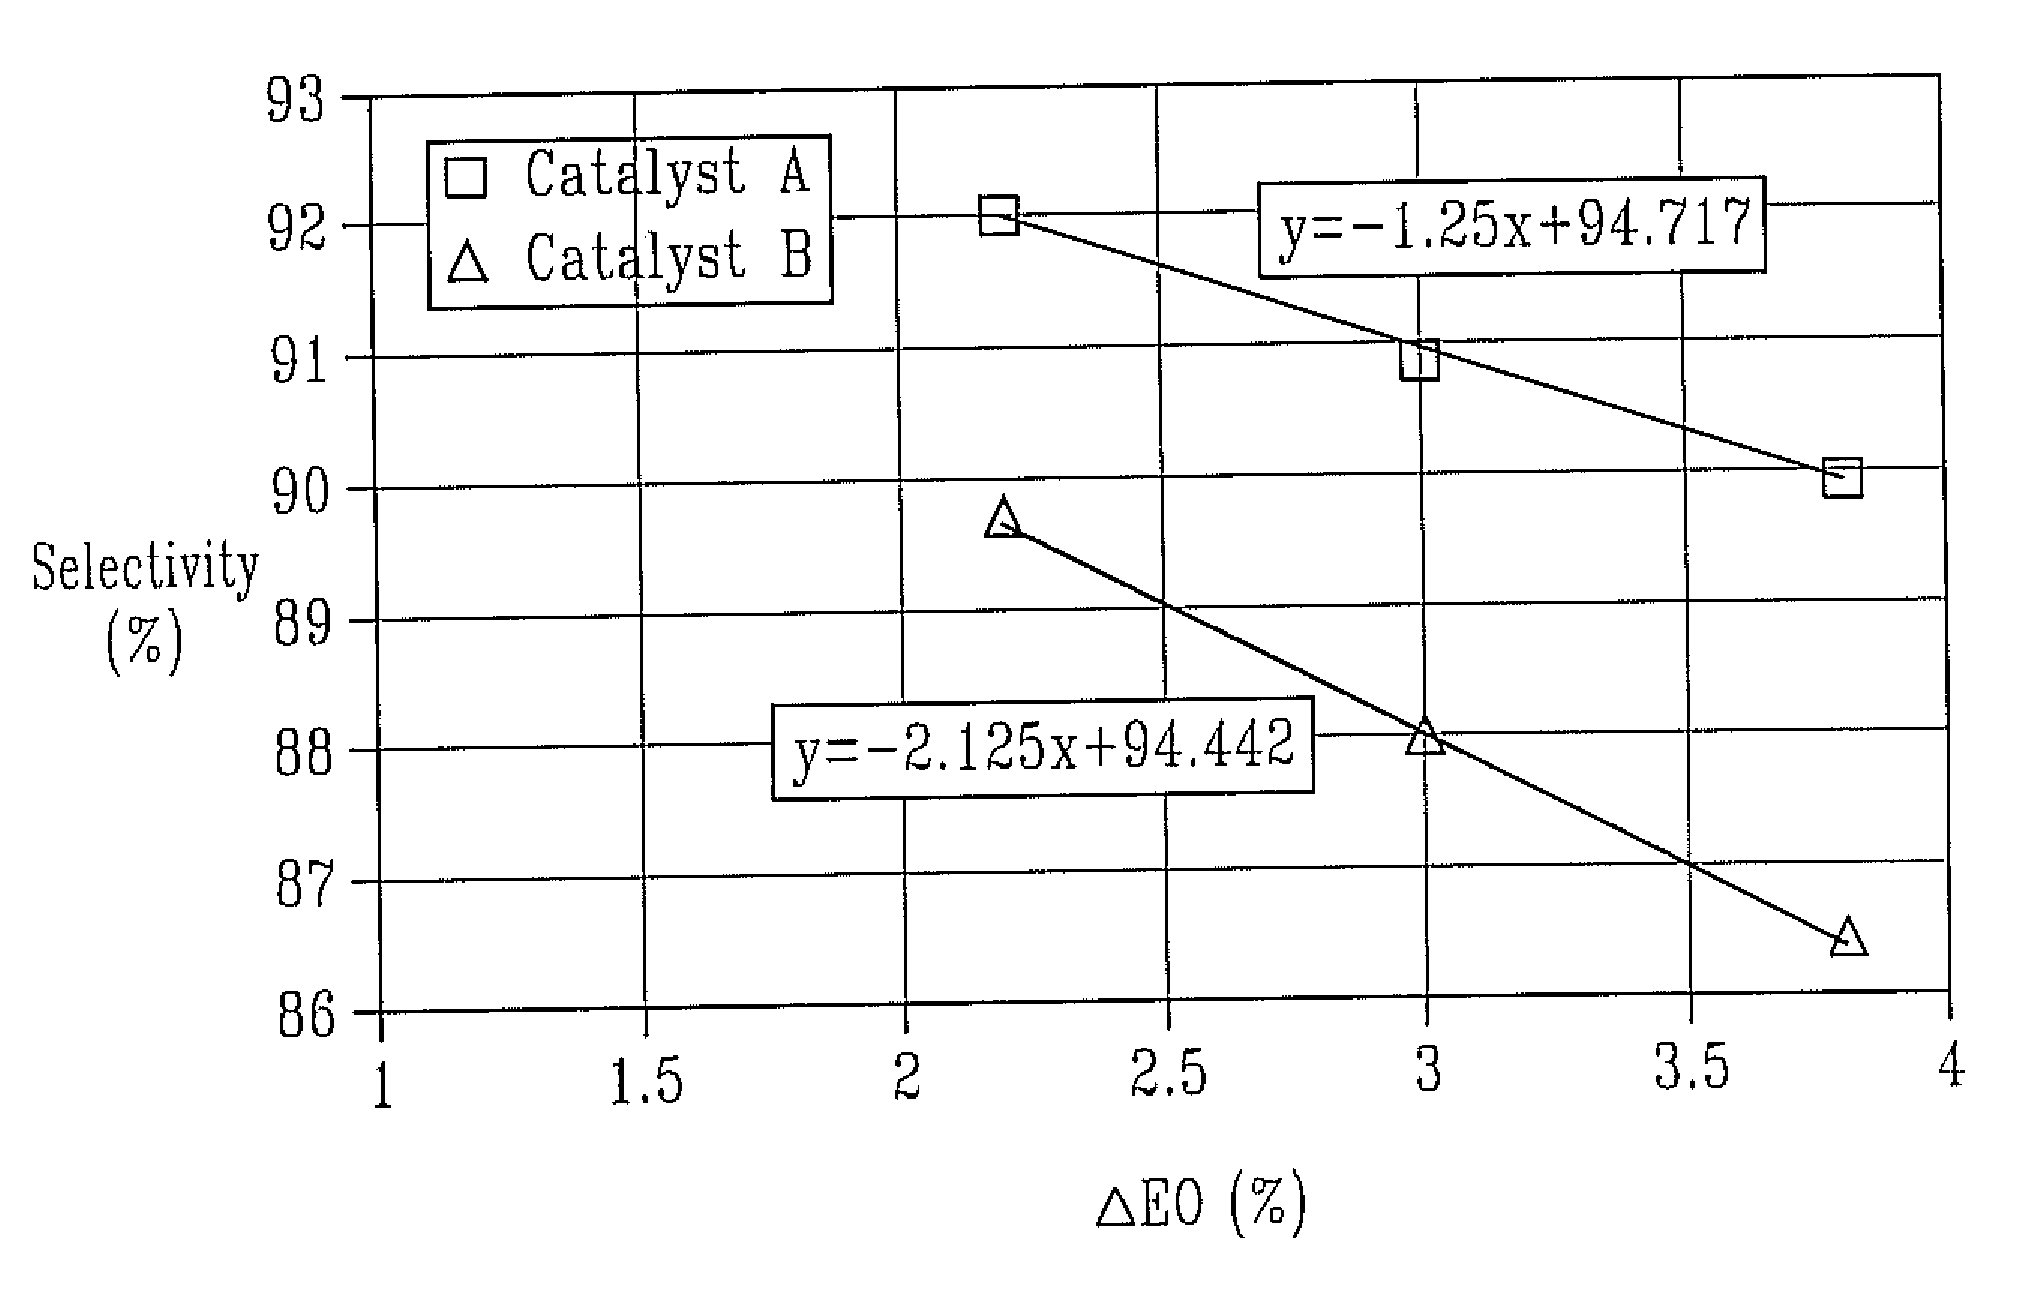 Process for production of an olefin oxide